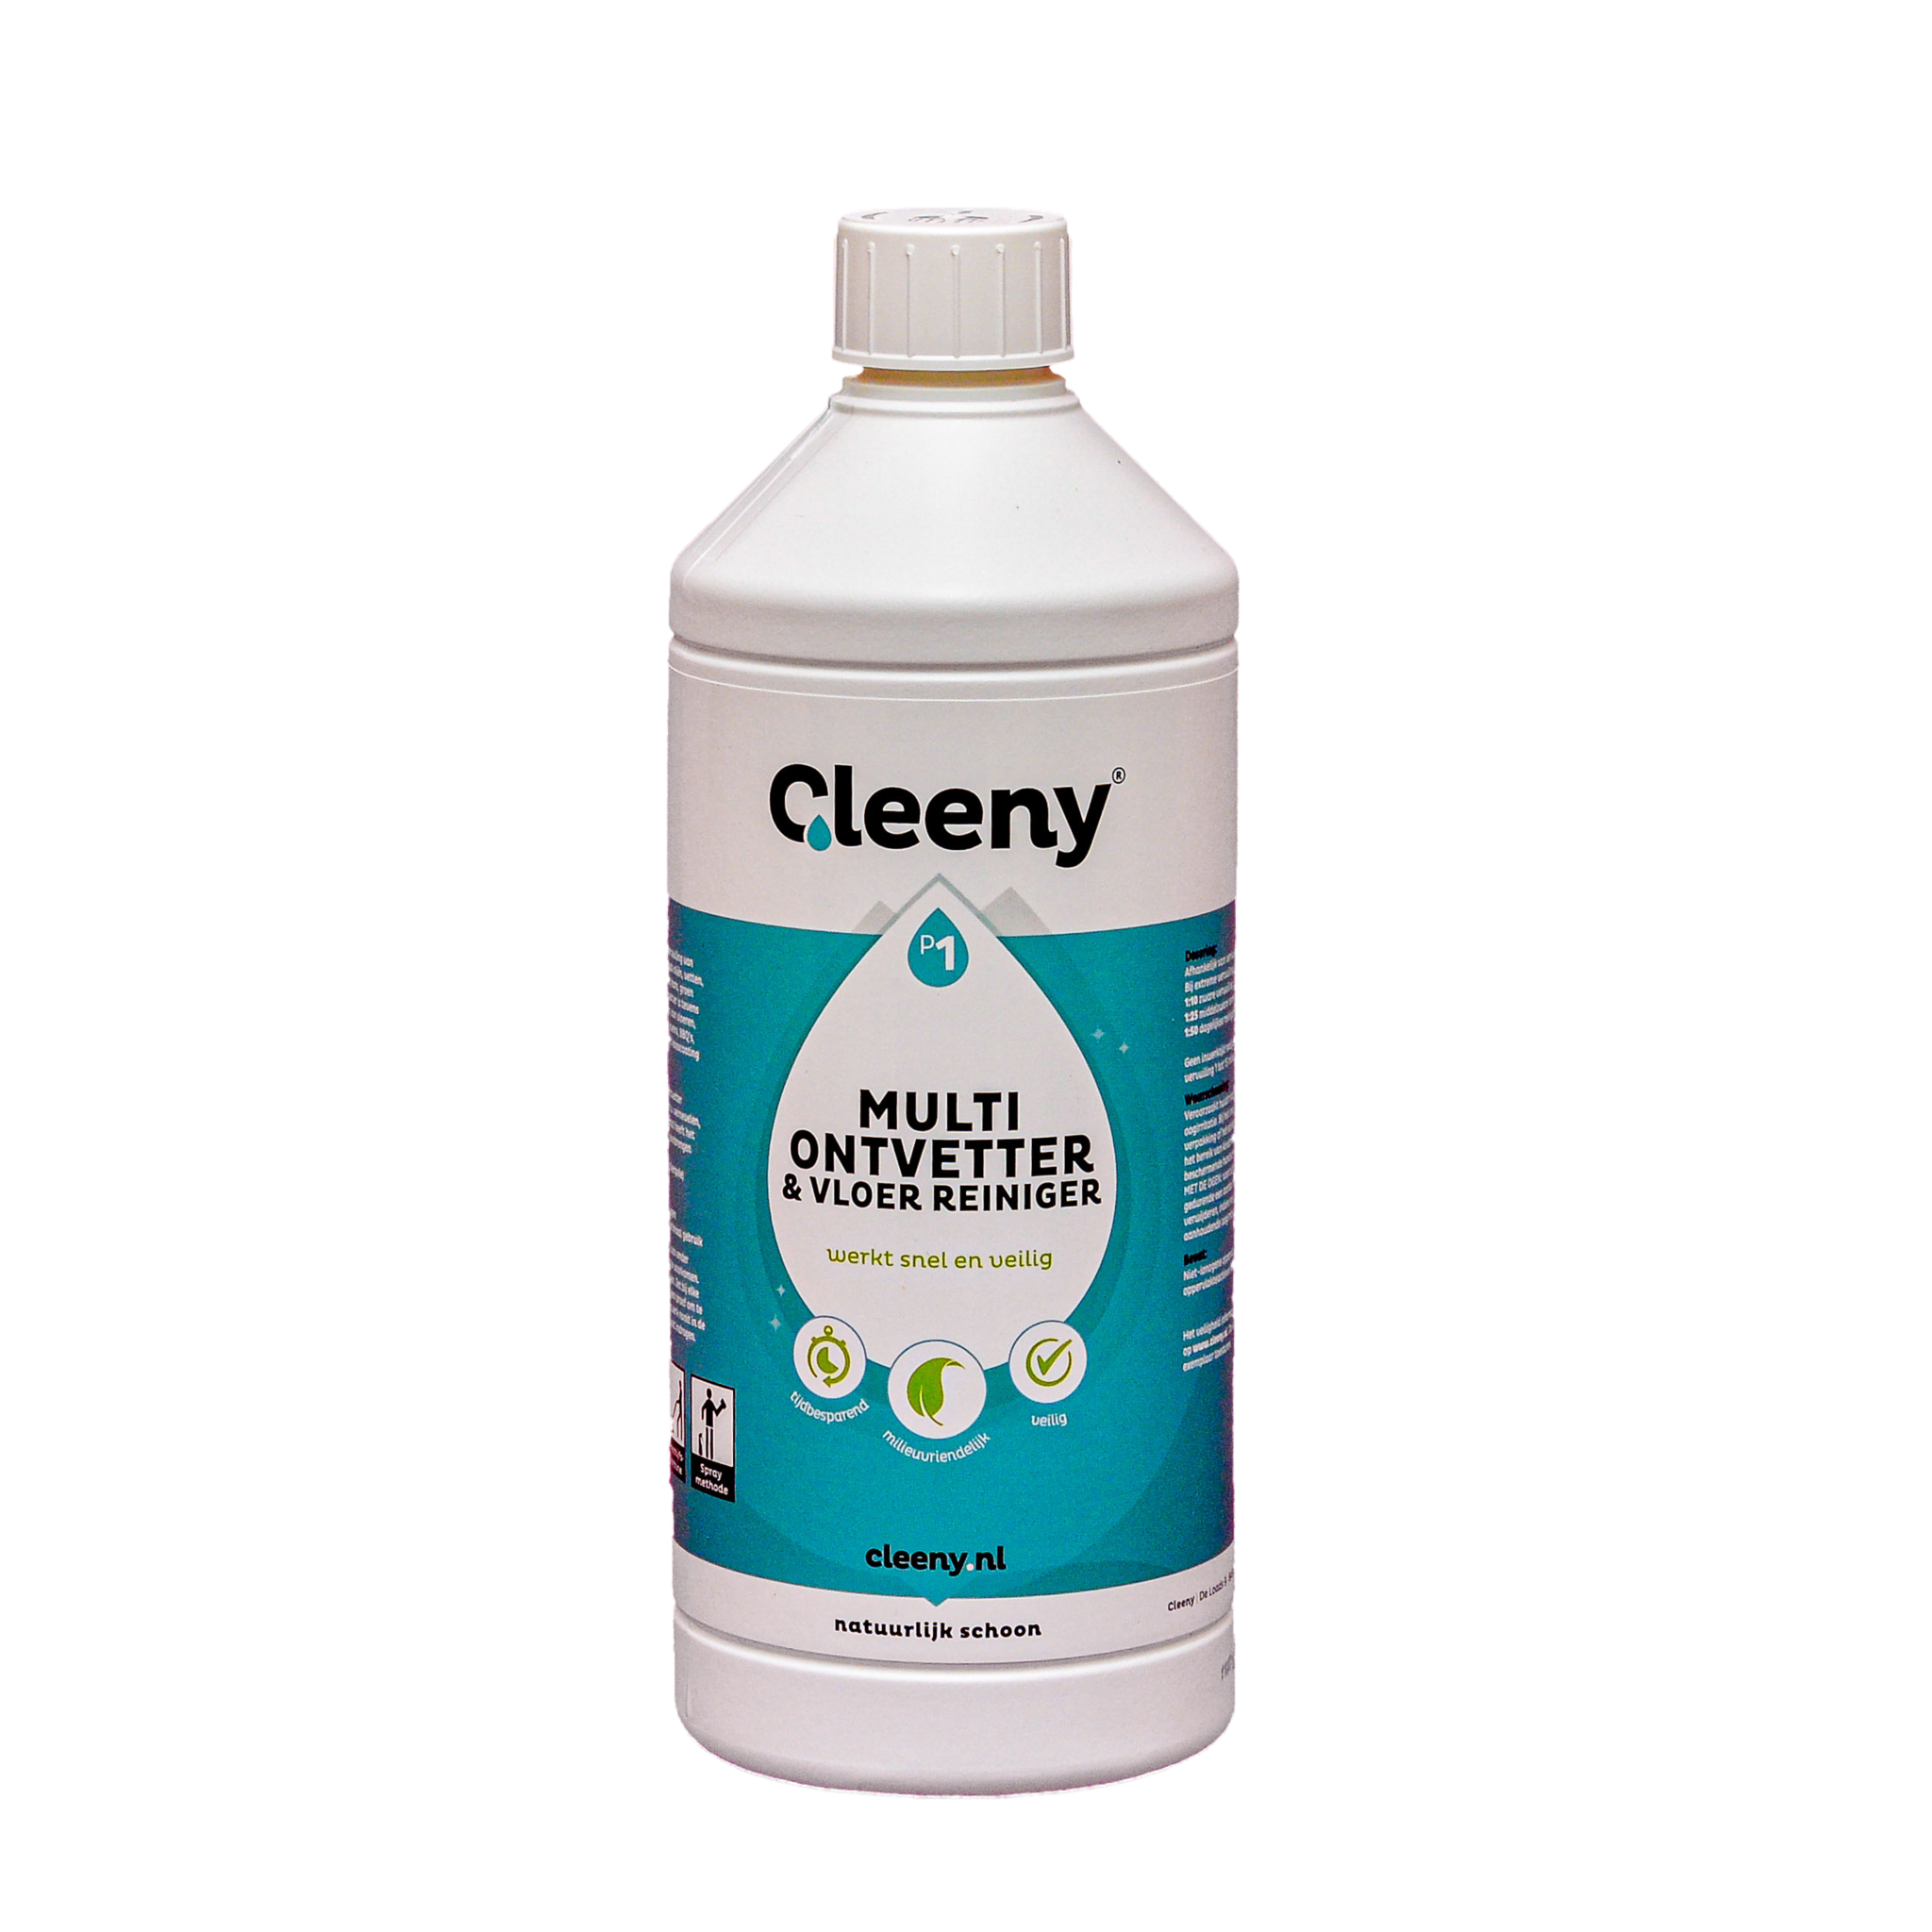 Cleeny Cleeny P1 ontvetter, 1 liter fles concentraat